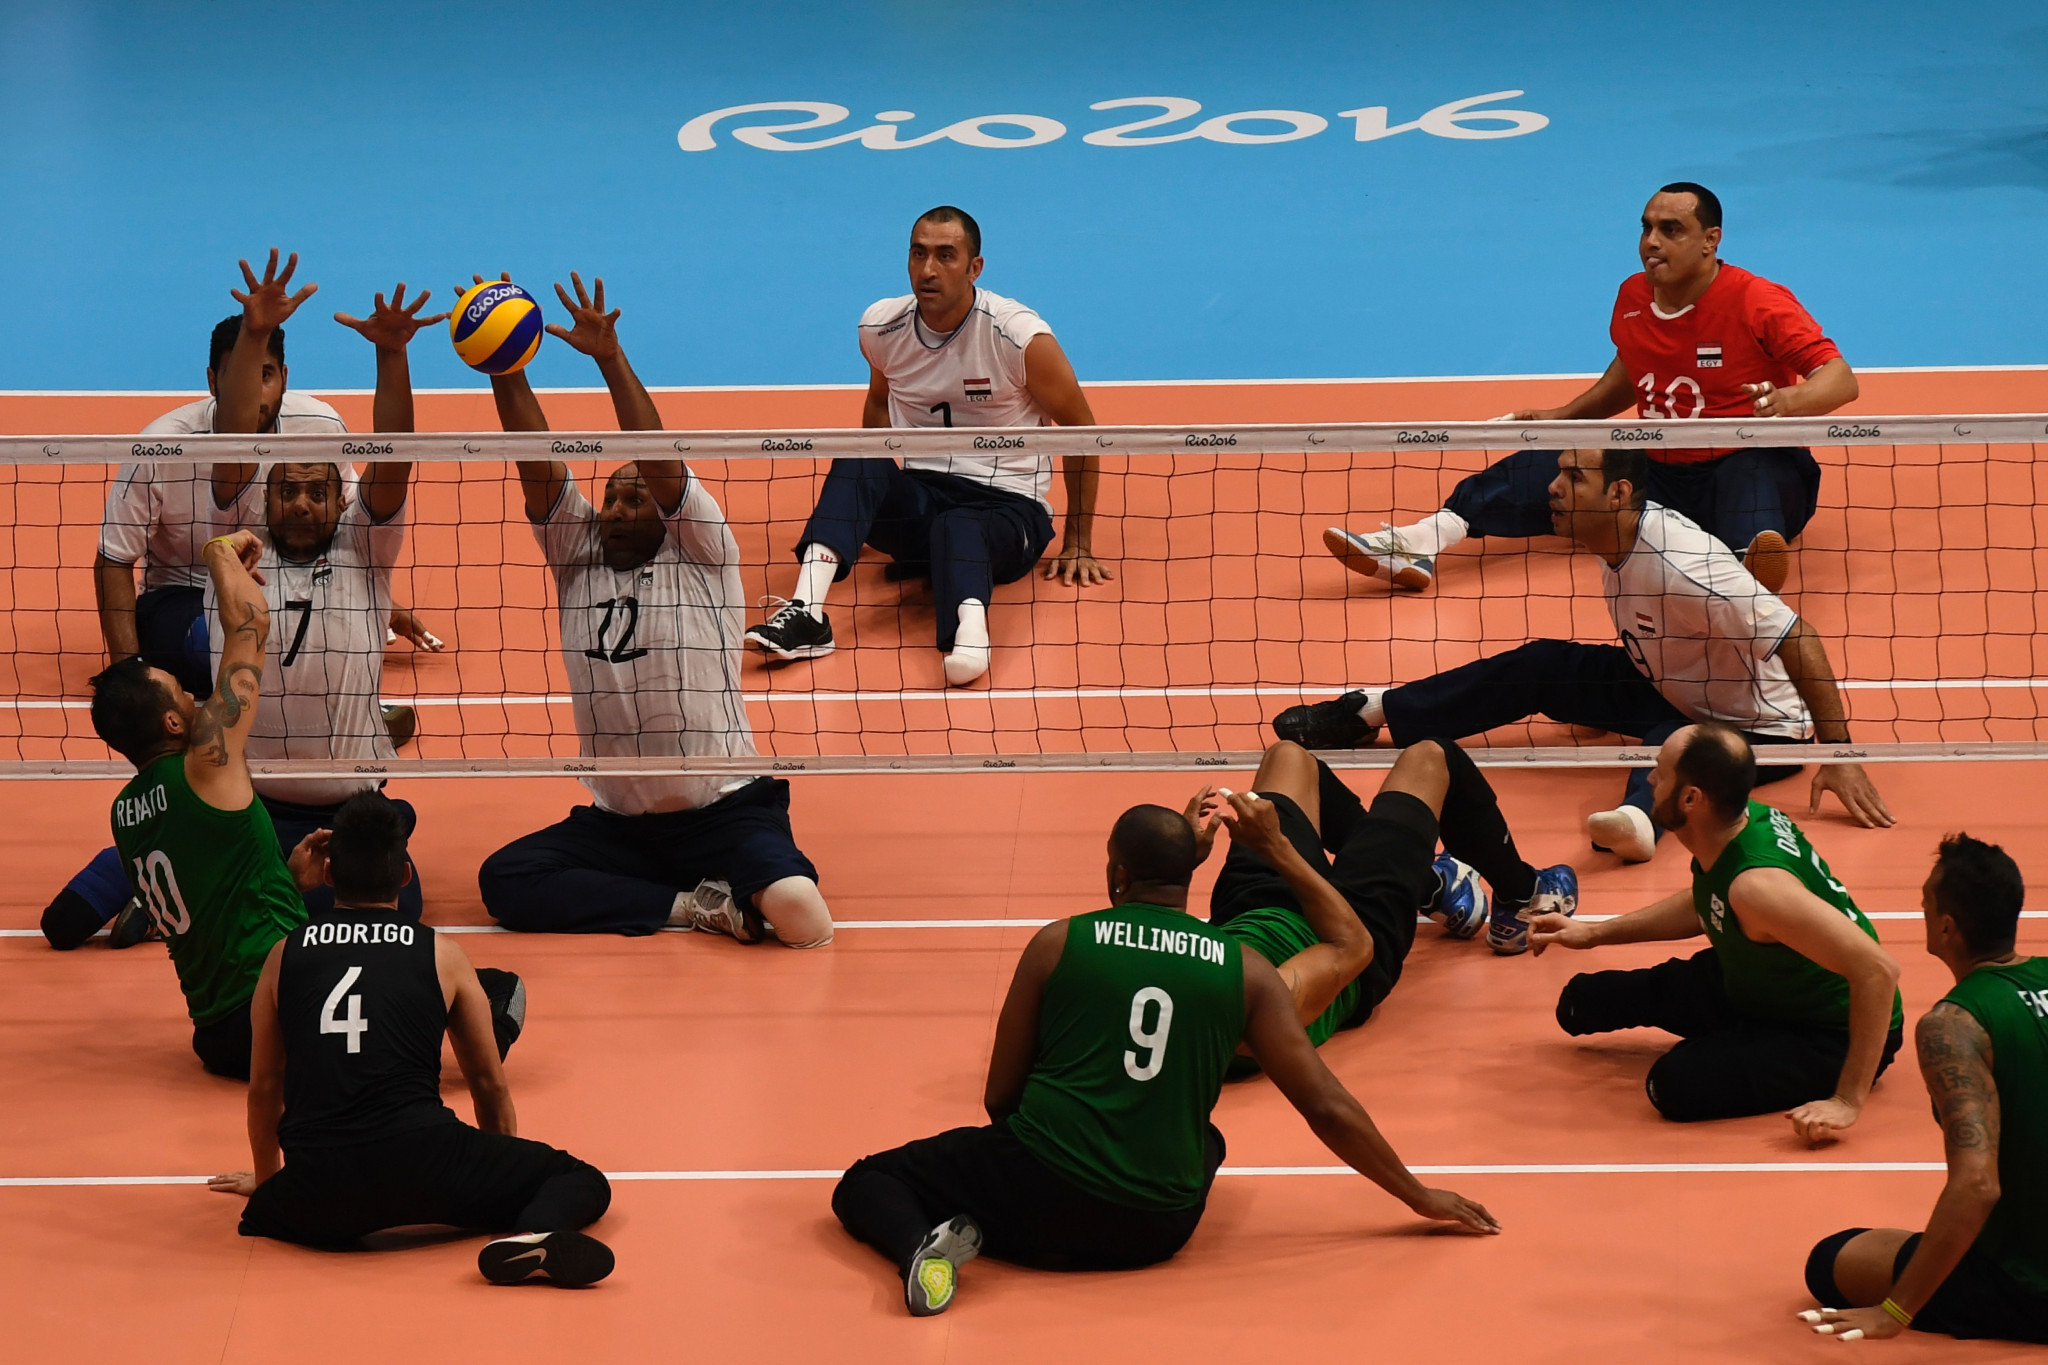 The online learning system is aimed at increasing knowledge about ParaVolley and allowing more access to technical education ©Getty Images